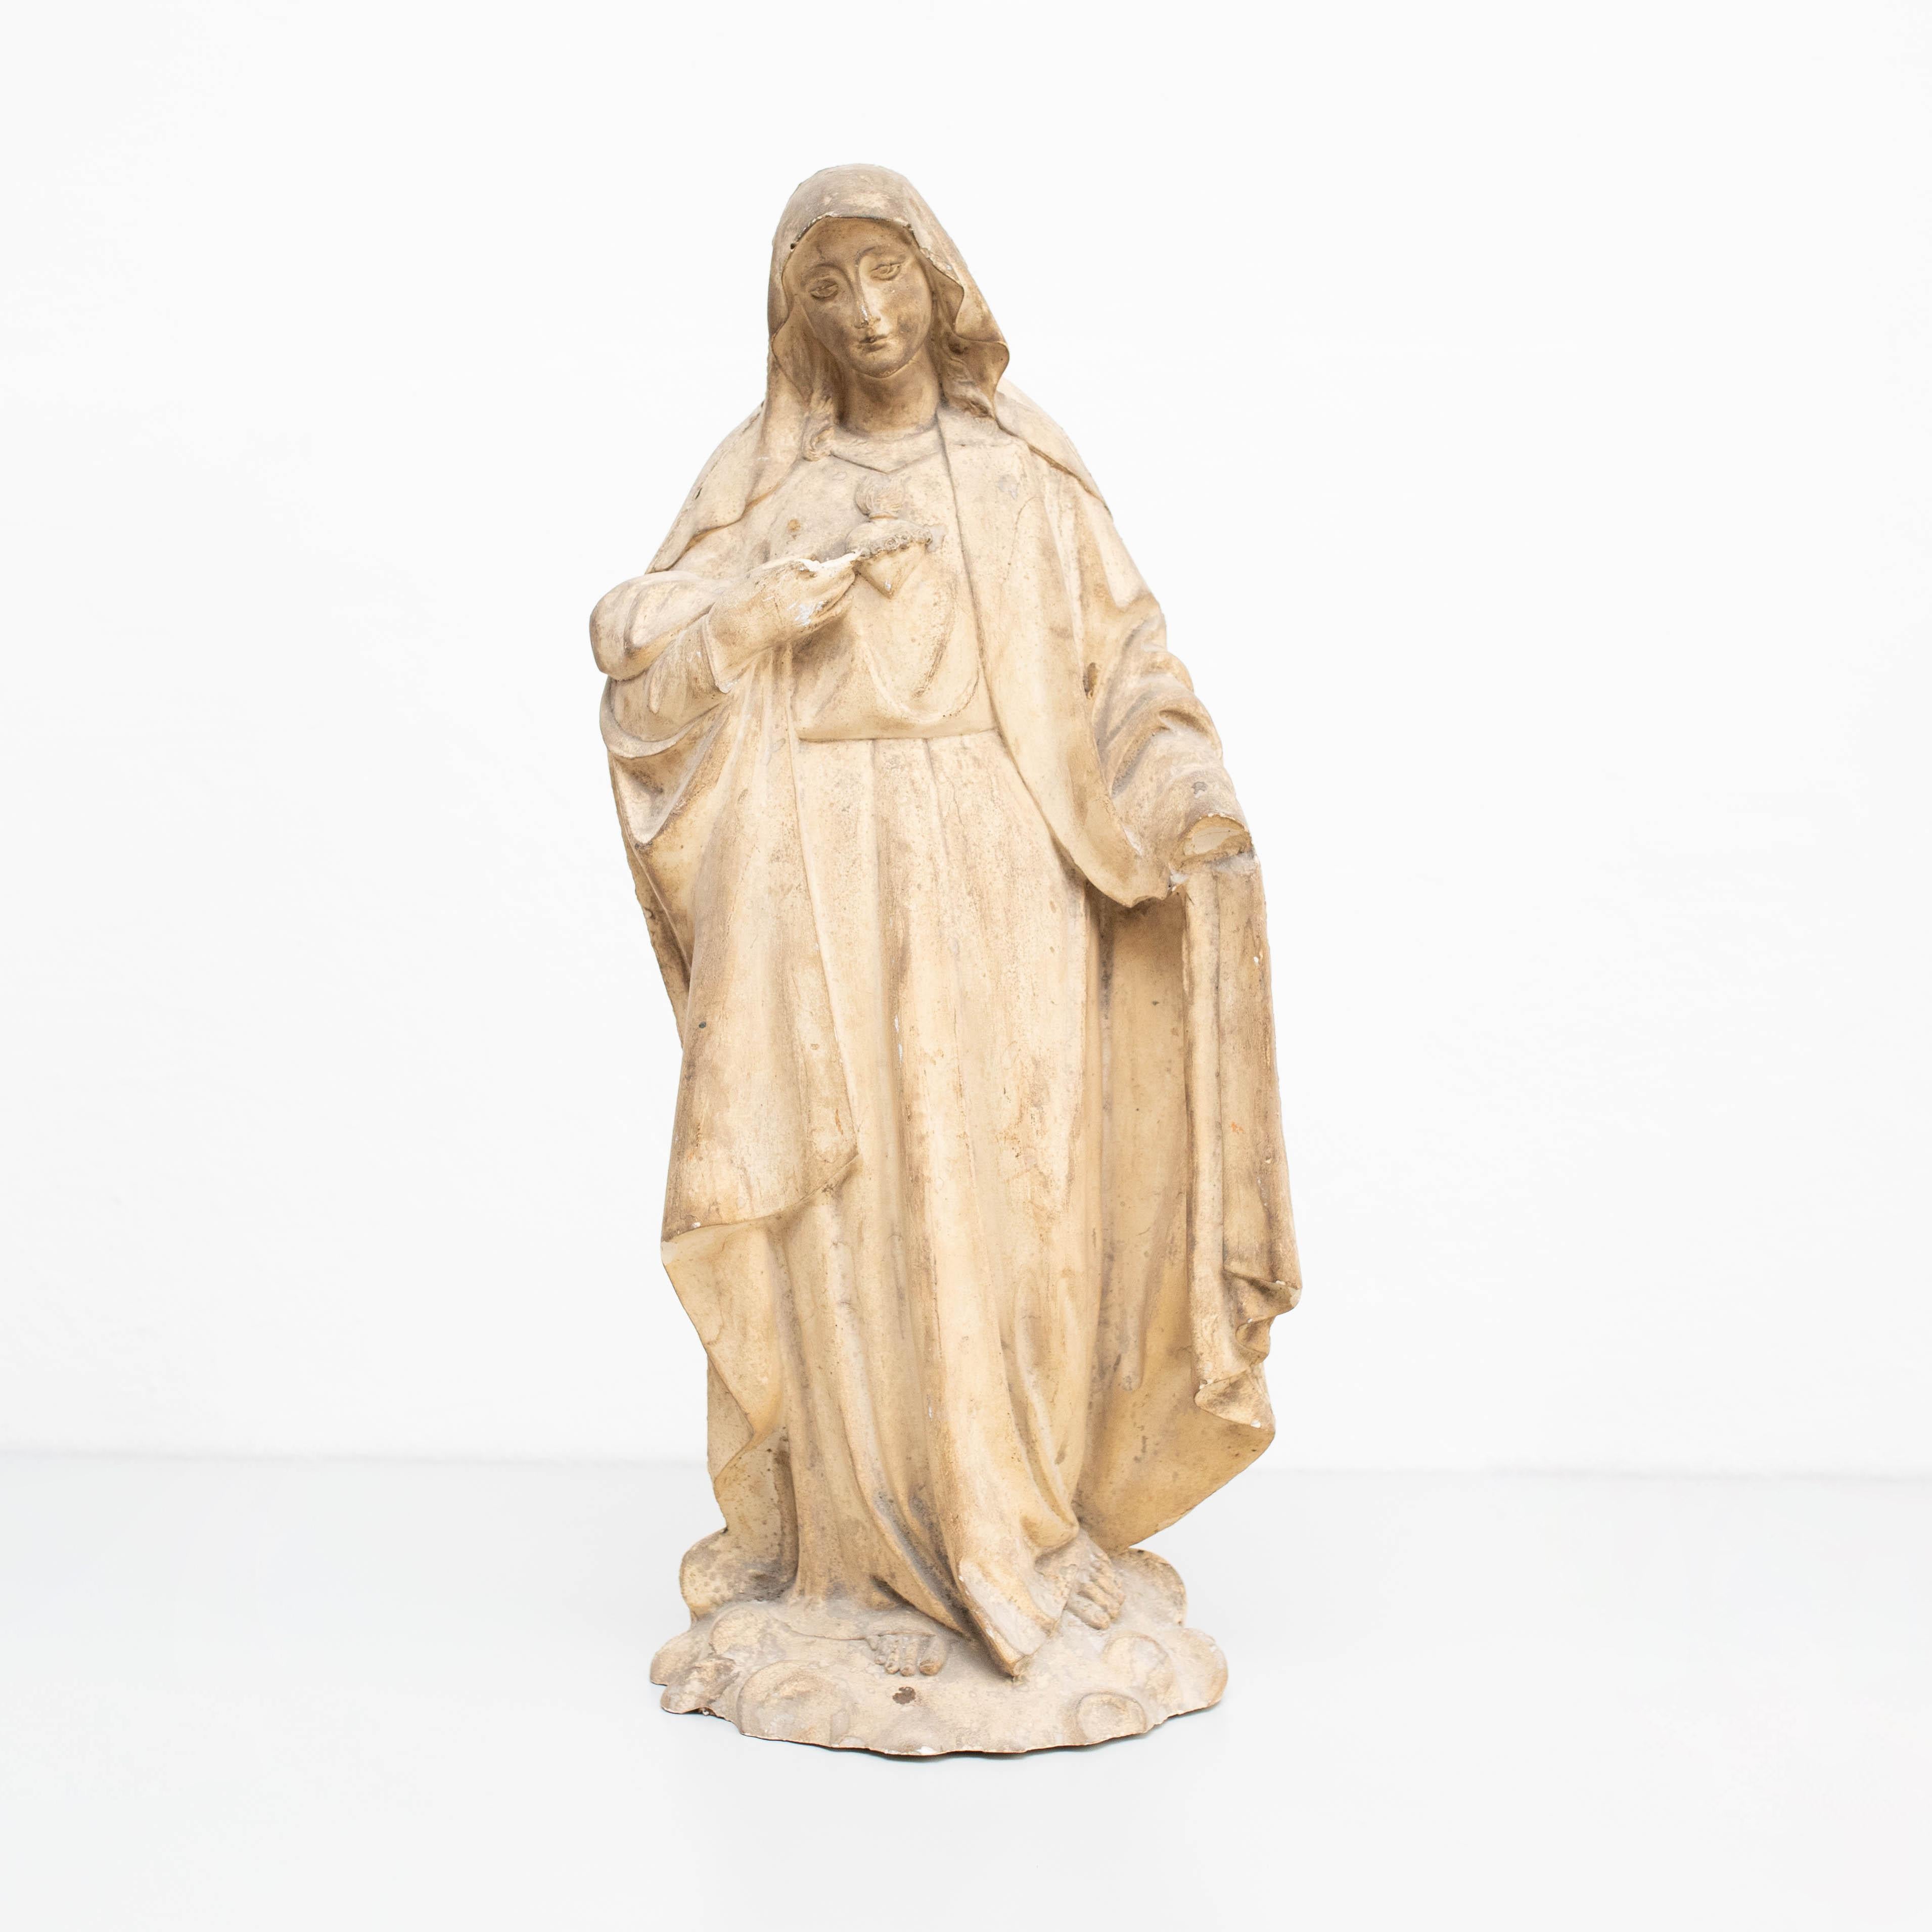 Traditional religious signed plaster figure of a virgin.

Made in traditional Catalan atelier, Spain, circa 1930.

In original condition, with minor wear consistent with age and use, preserving a beautiful